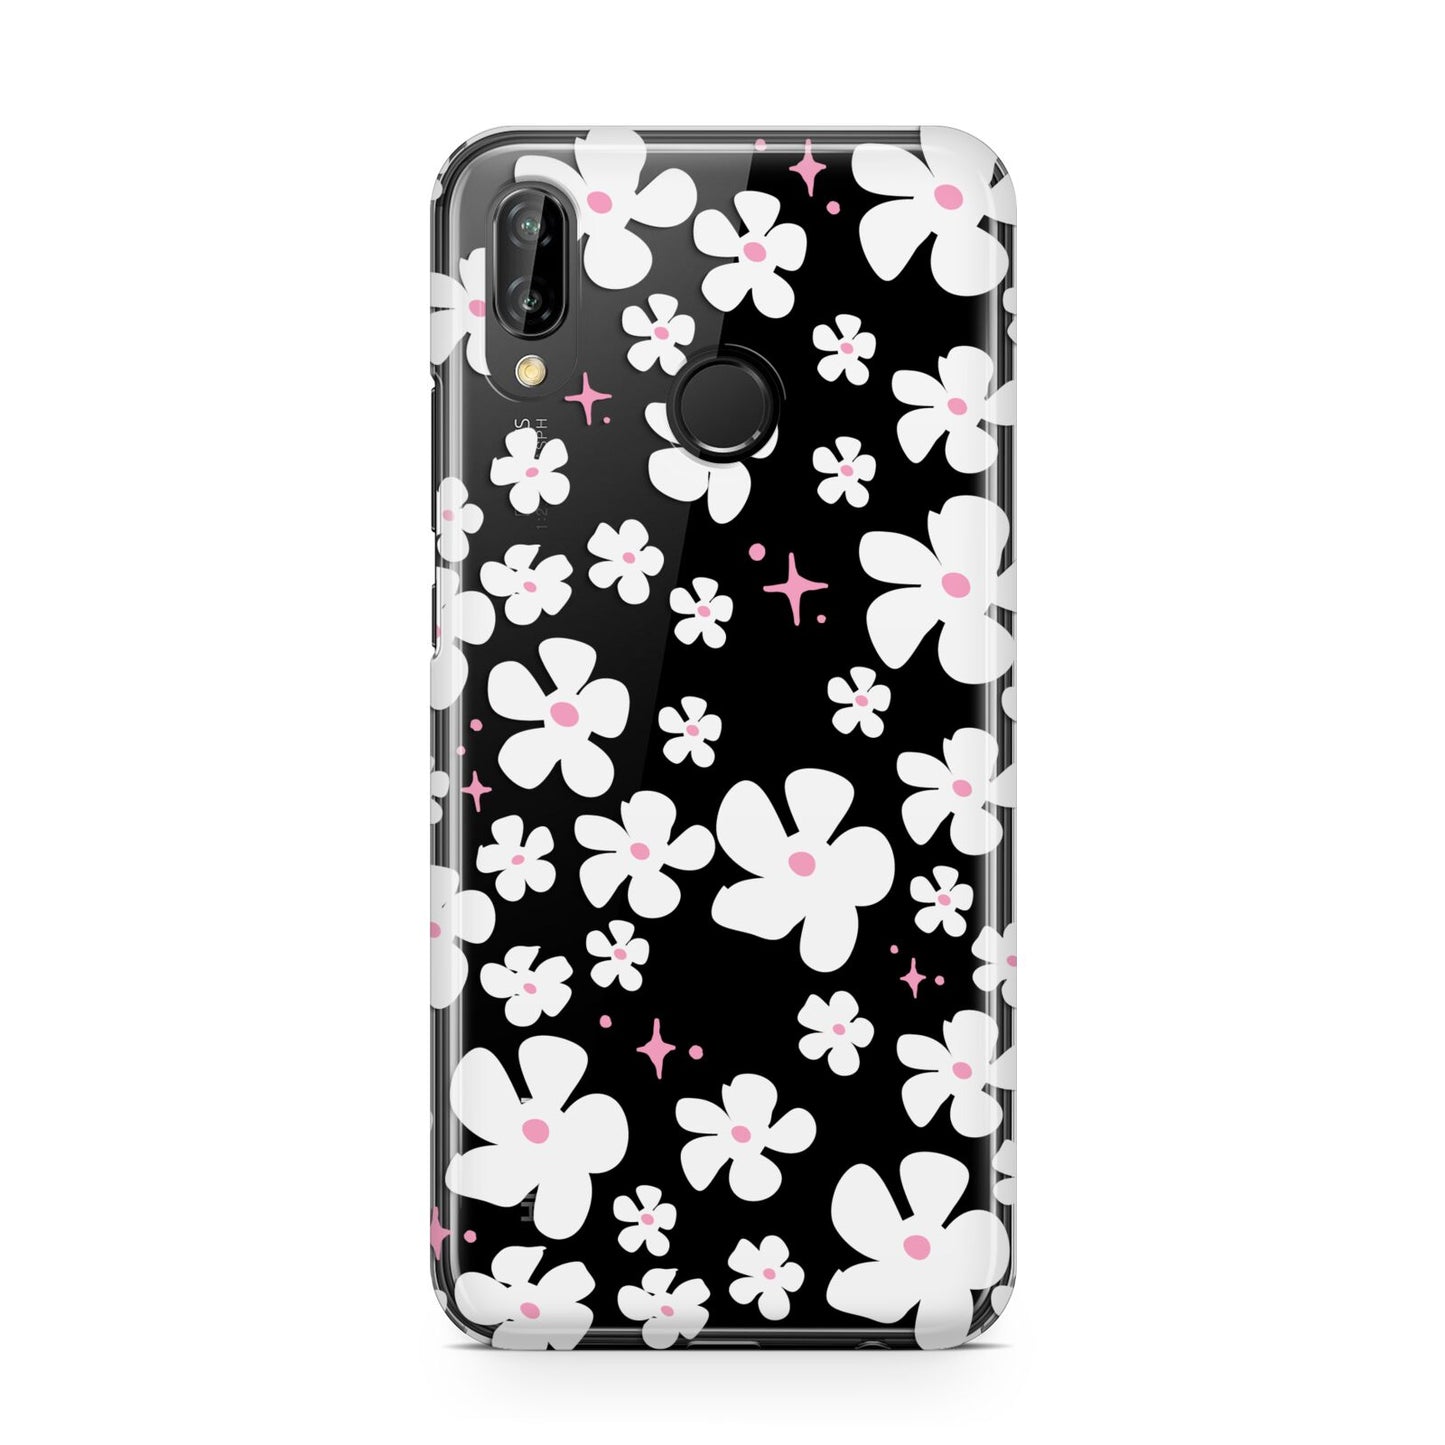 Abstract Daisy Huawei P20 Lite Phone Case